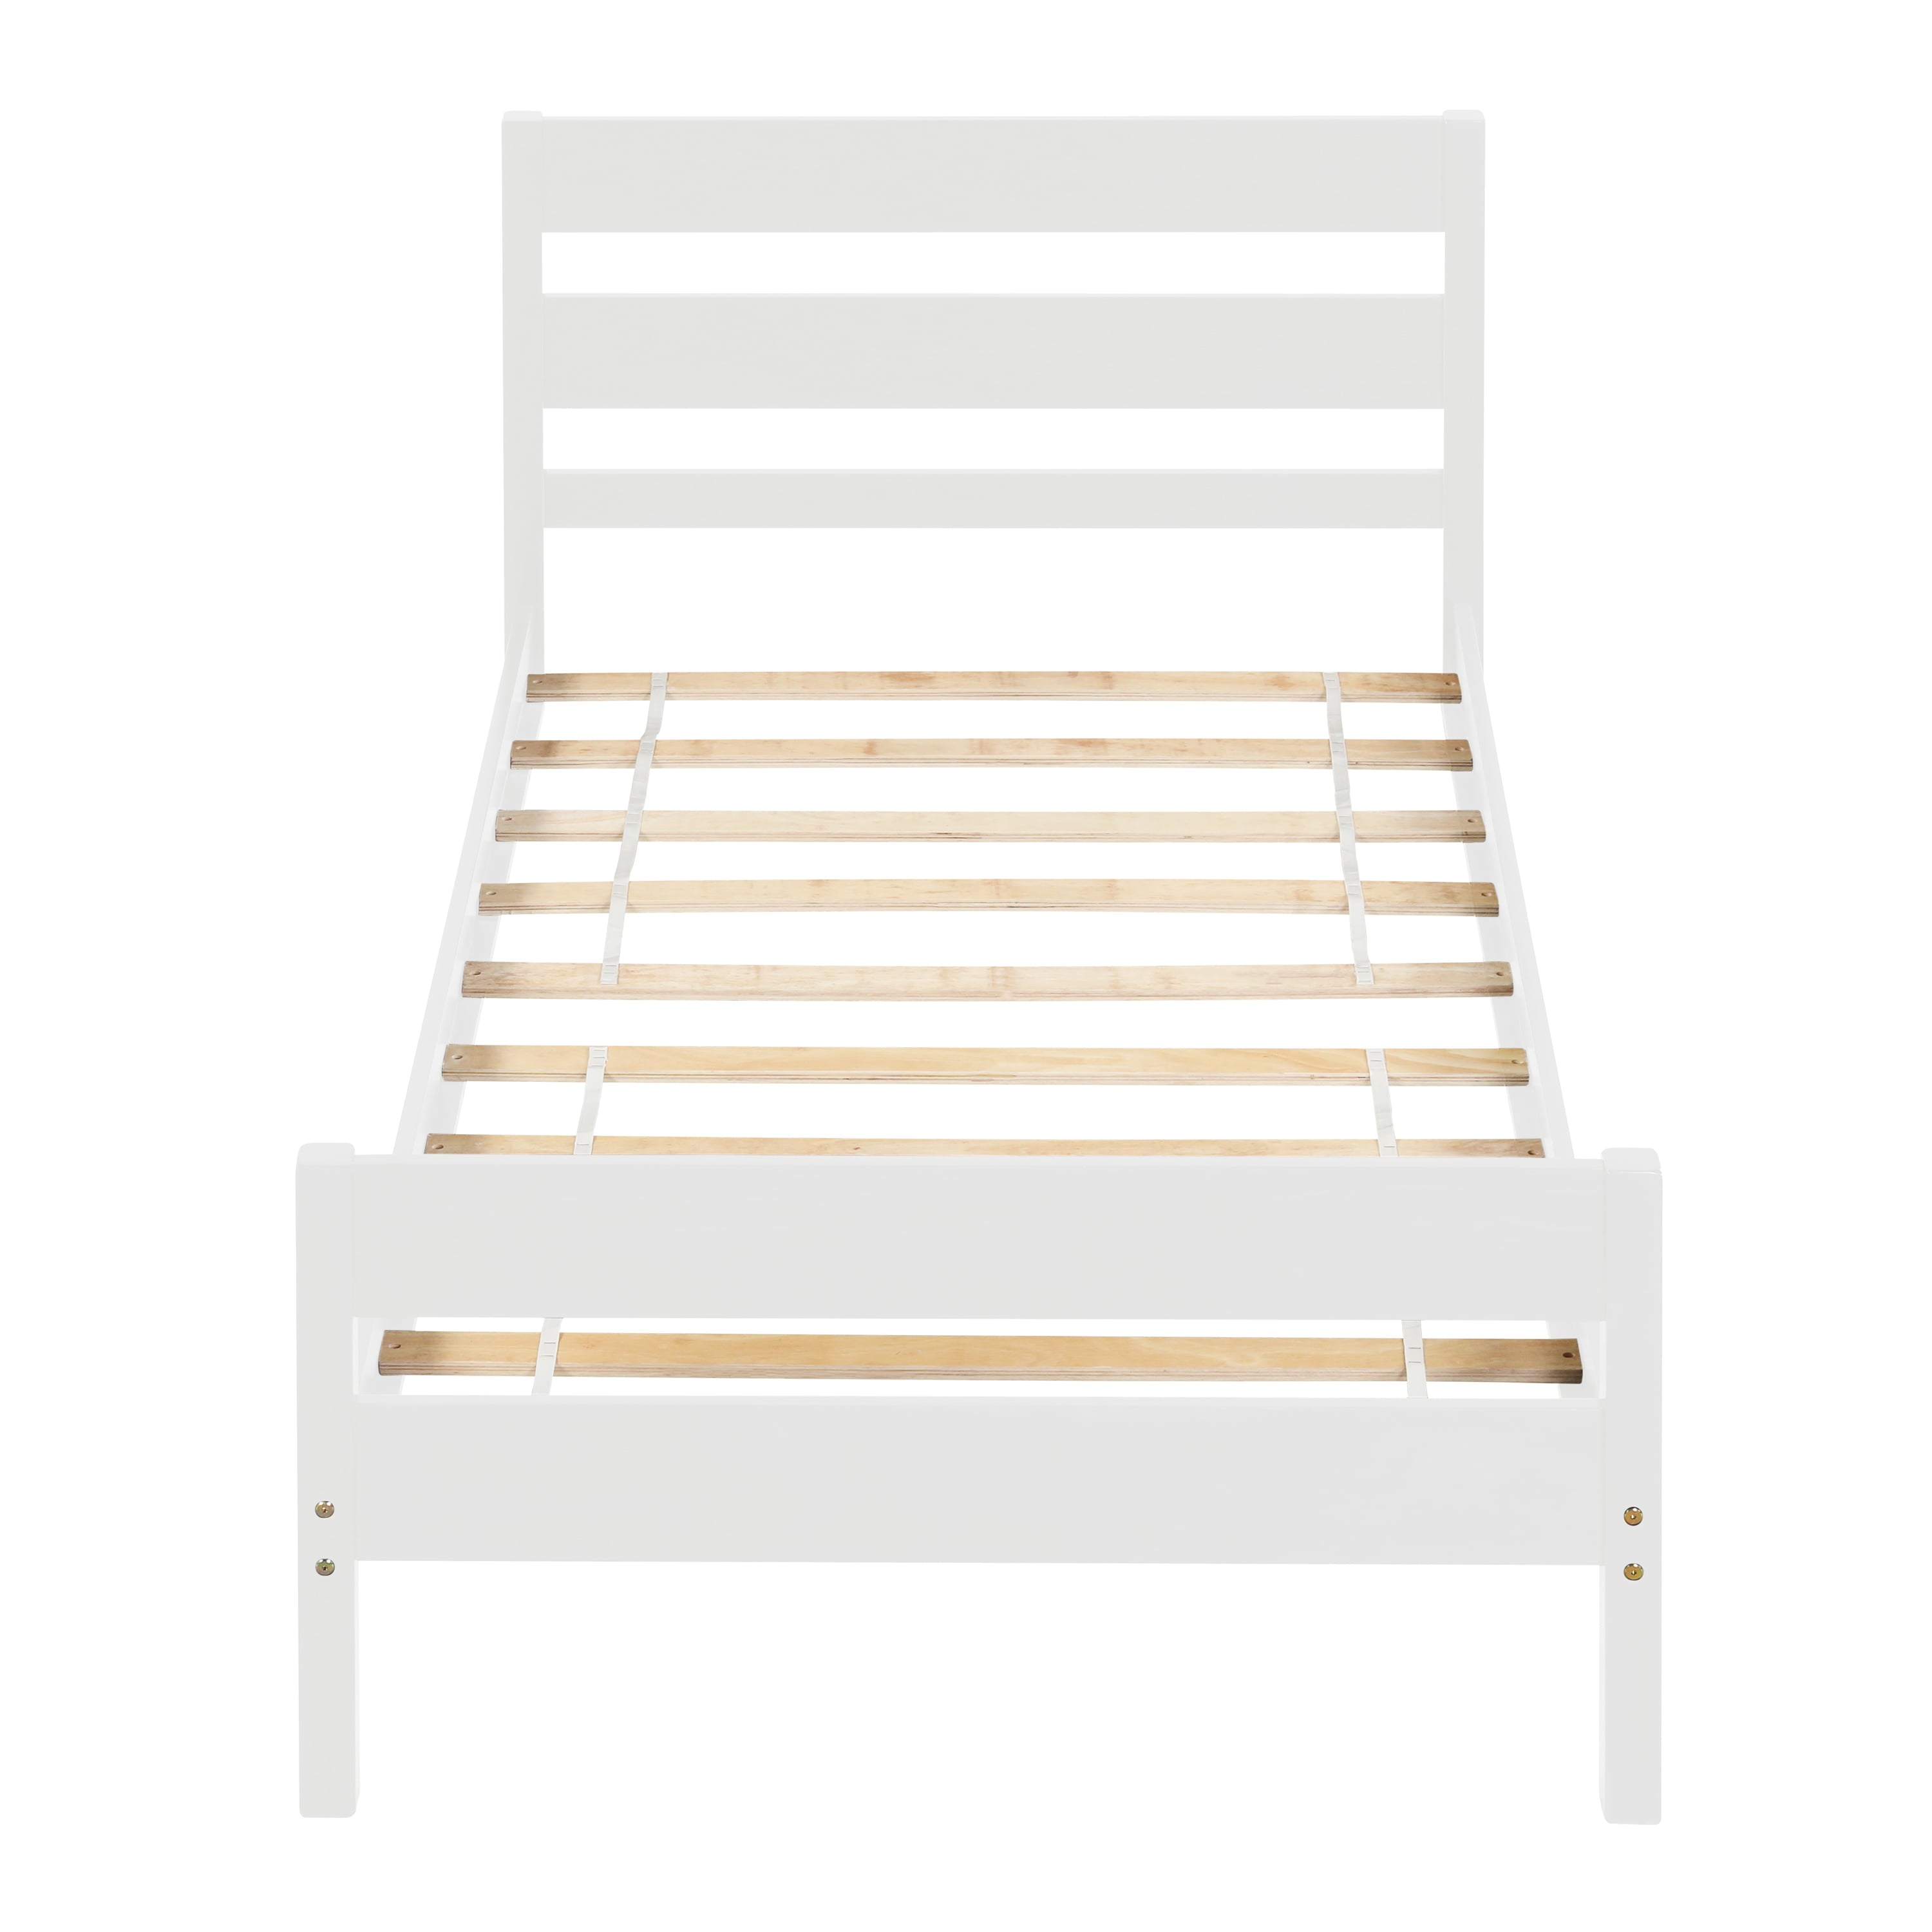 uhomepro Twin Bed Frame No Box Spring Needed, Wood Platform Bed Frame with Headboard and Footboard, Strong Wooden Slats, Twin Bed Frames for Kids, Adults, Modern Bedroom Furniture, White